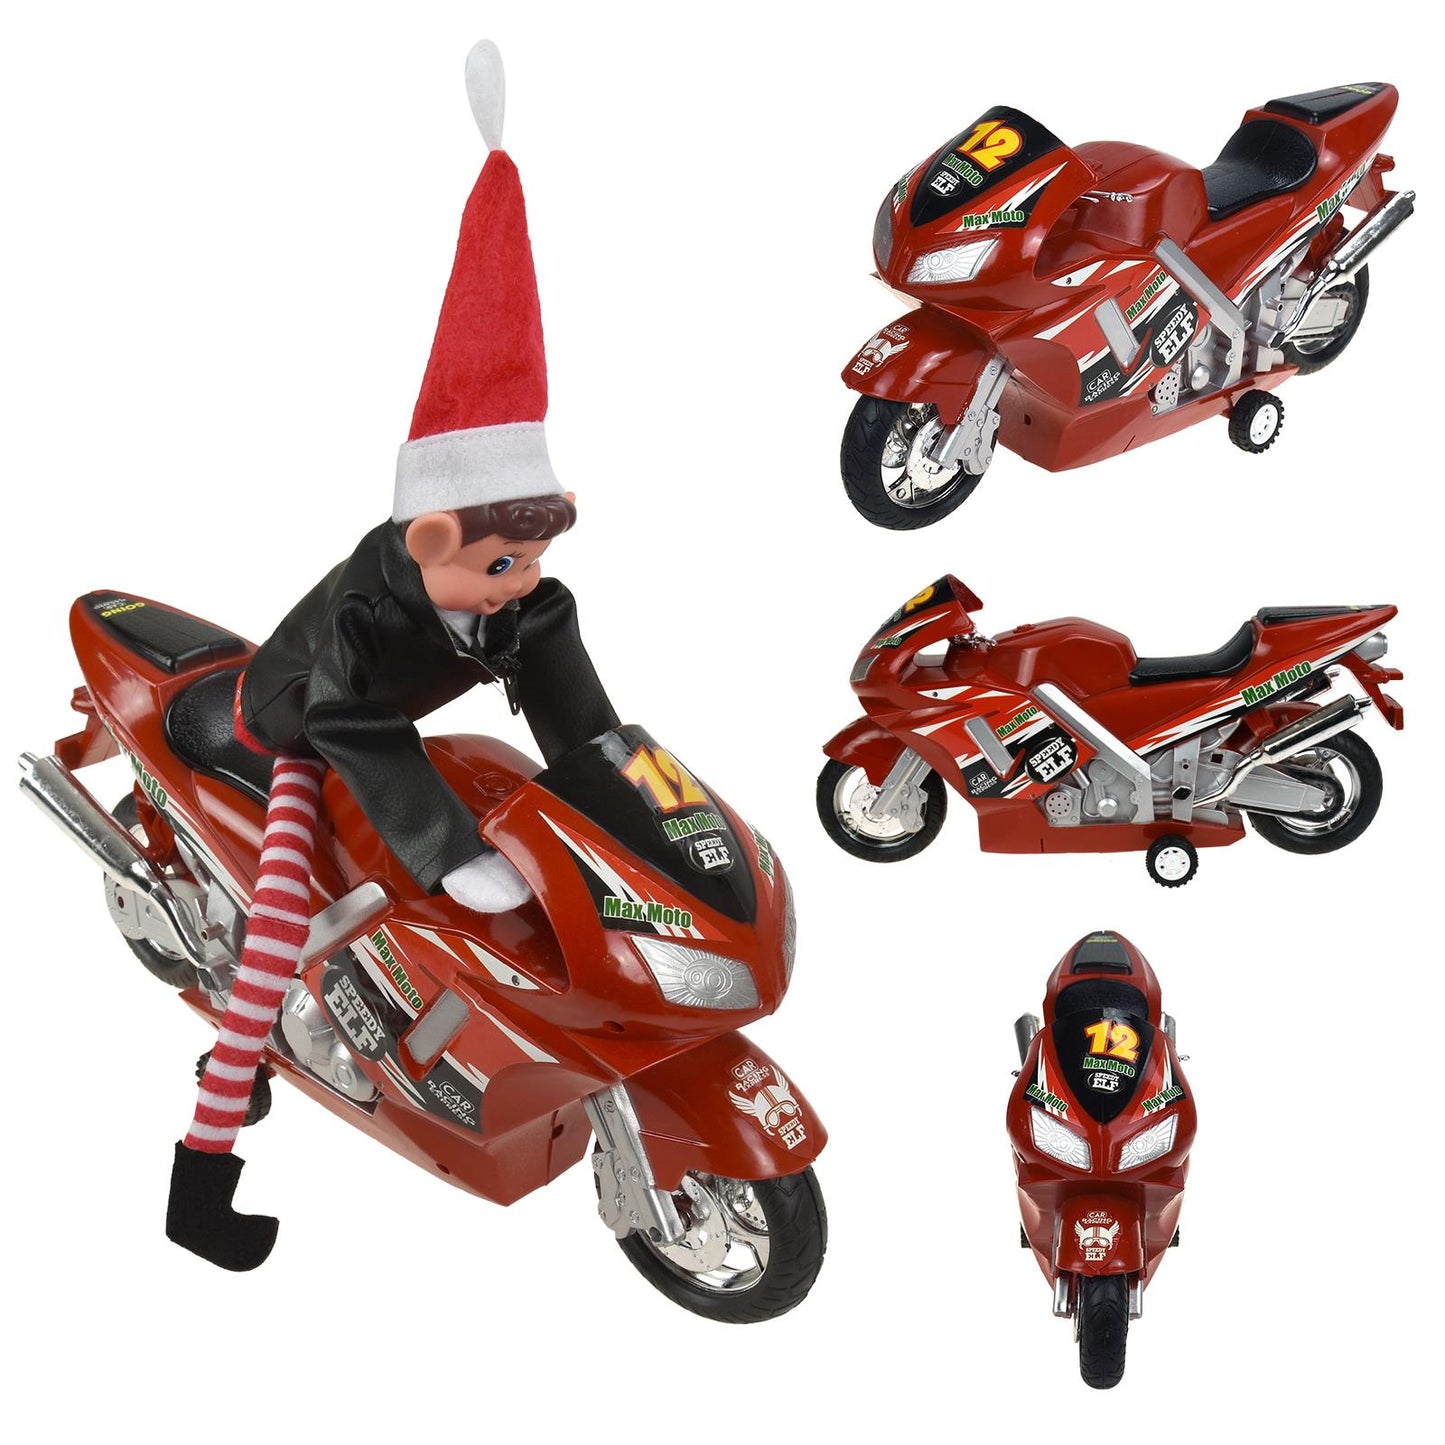 Add Some Quirky Charm with Elf Motorbike Selection Ornament